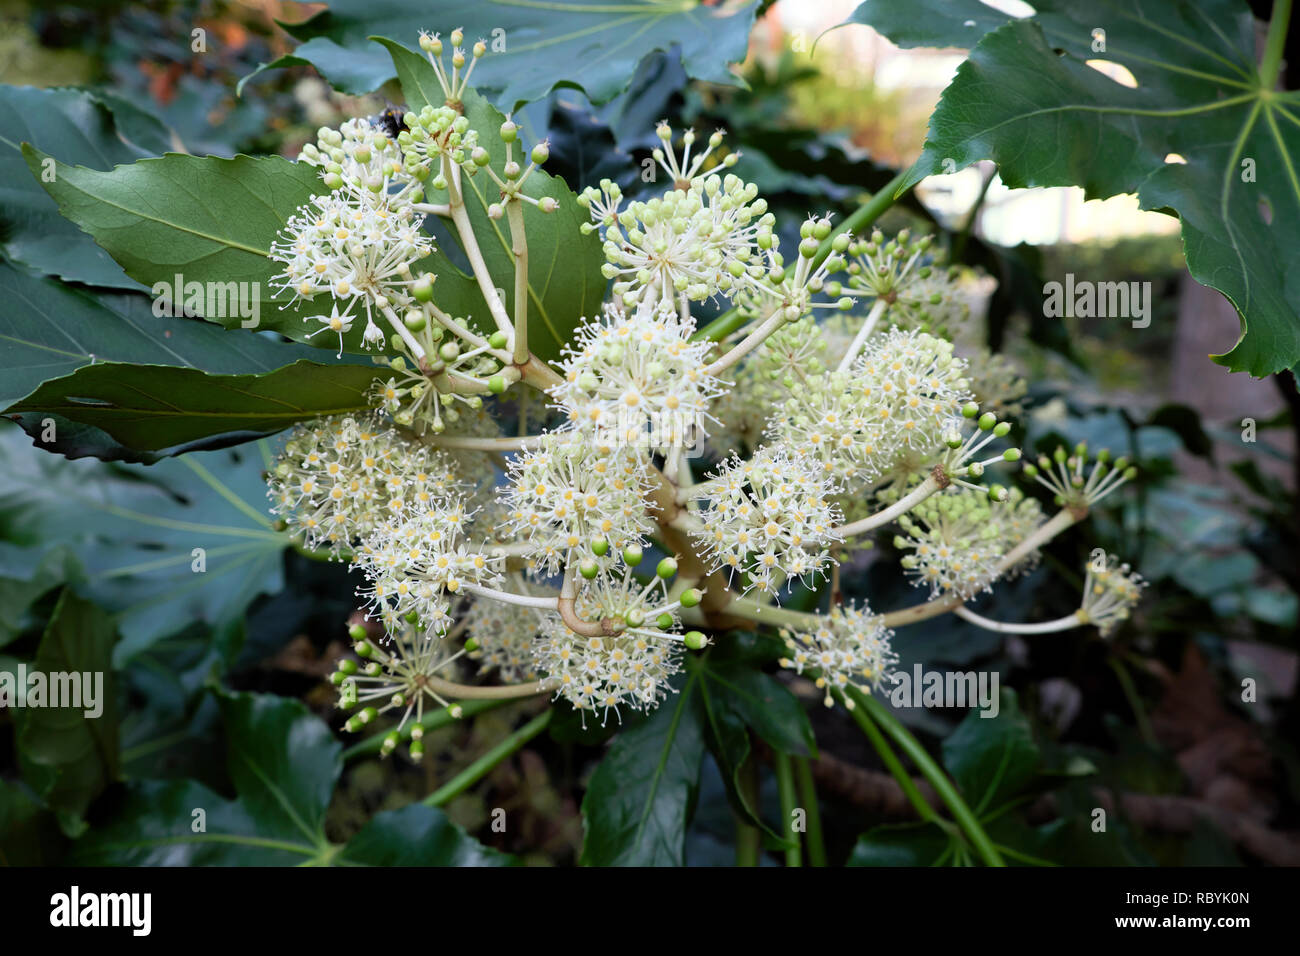 Fatsia Japonica shrub or Japanese paper plant with white flowers flowering in December in London England UK  KATHY DEWITT Stock Photo